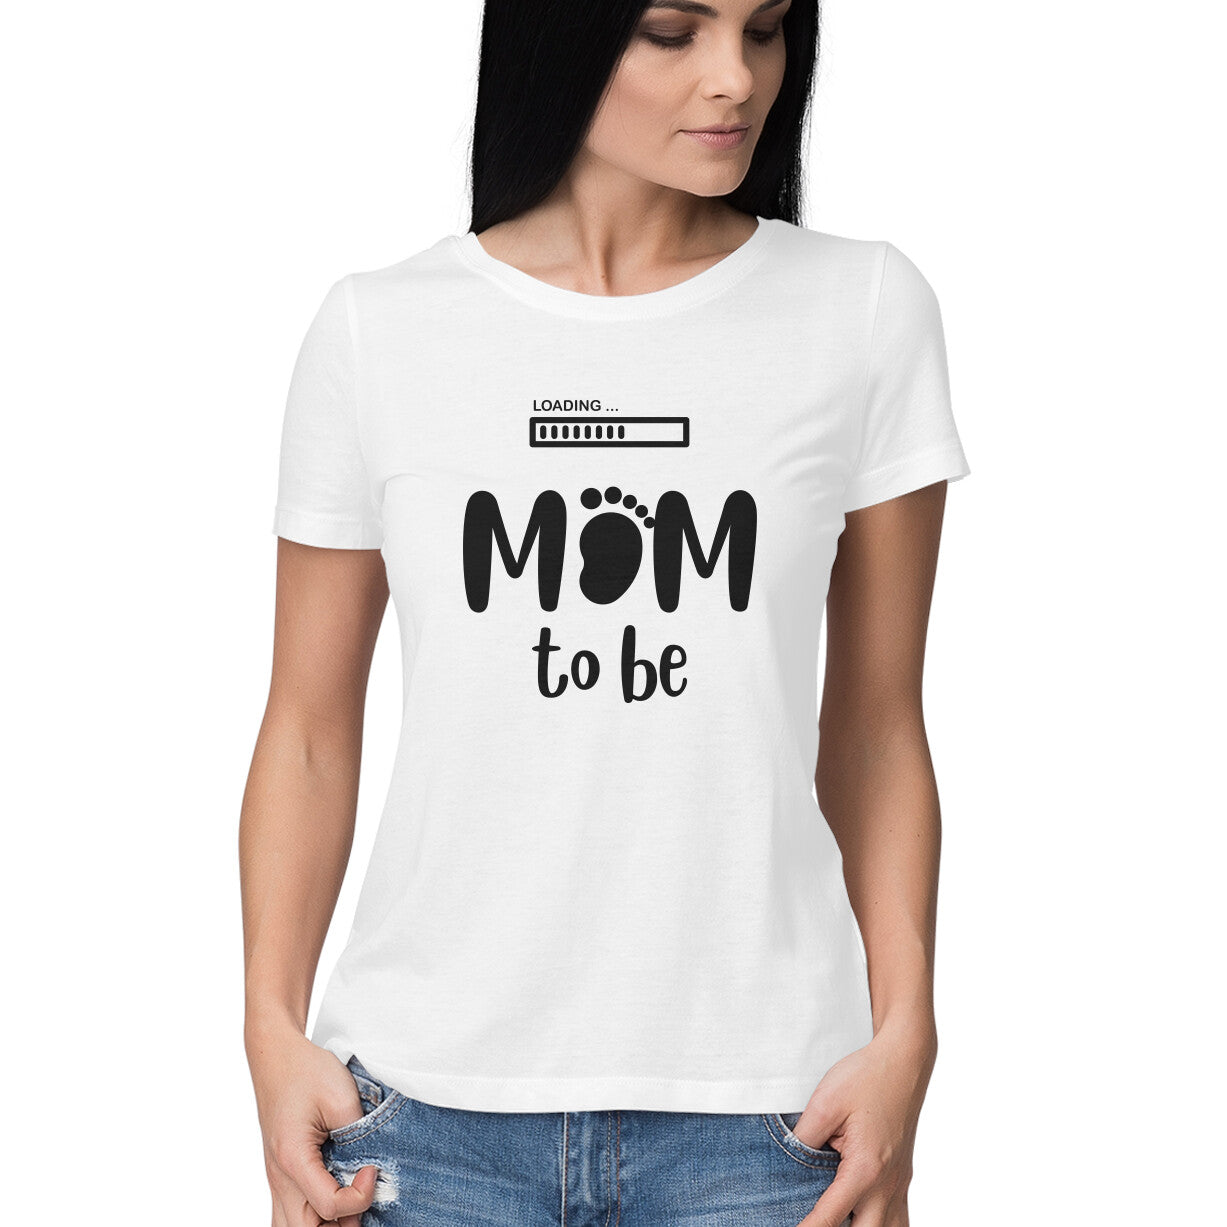 mom to be shirt